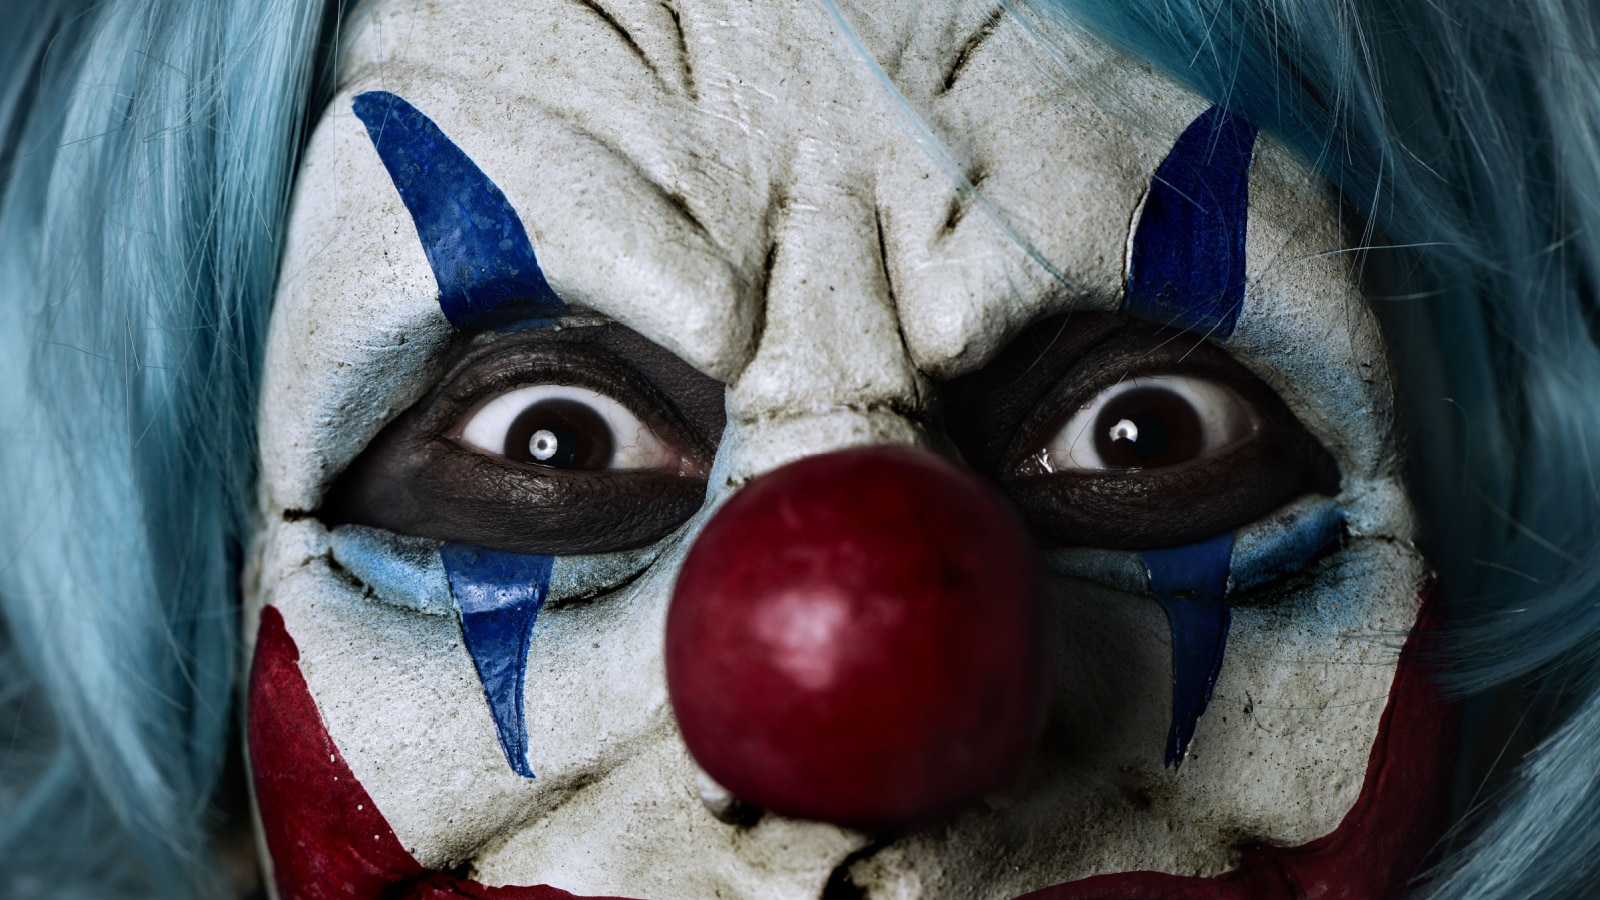 closeup of a scary evil clown wearing a blue hair wig